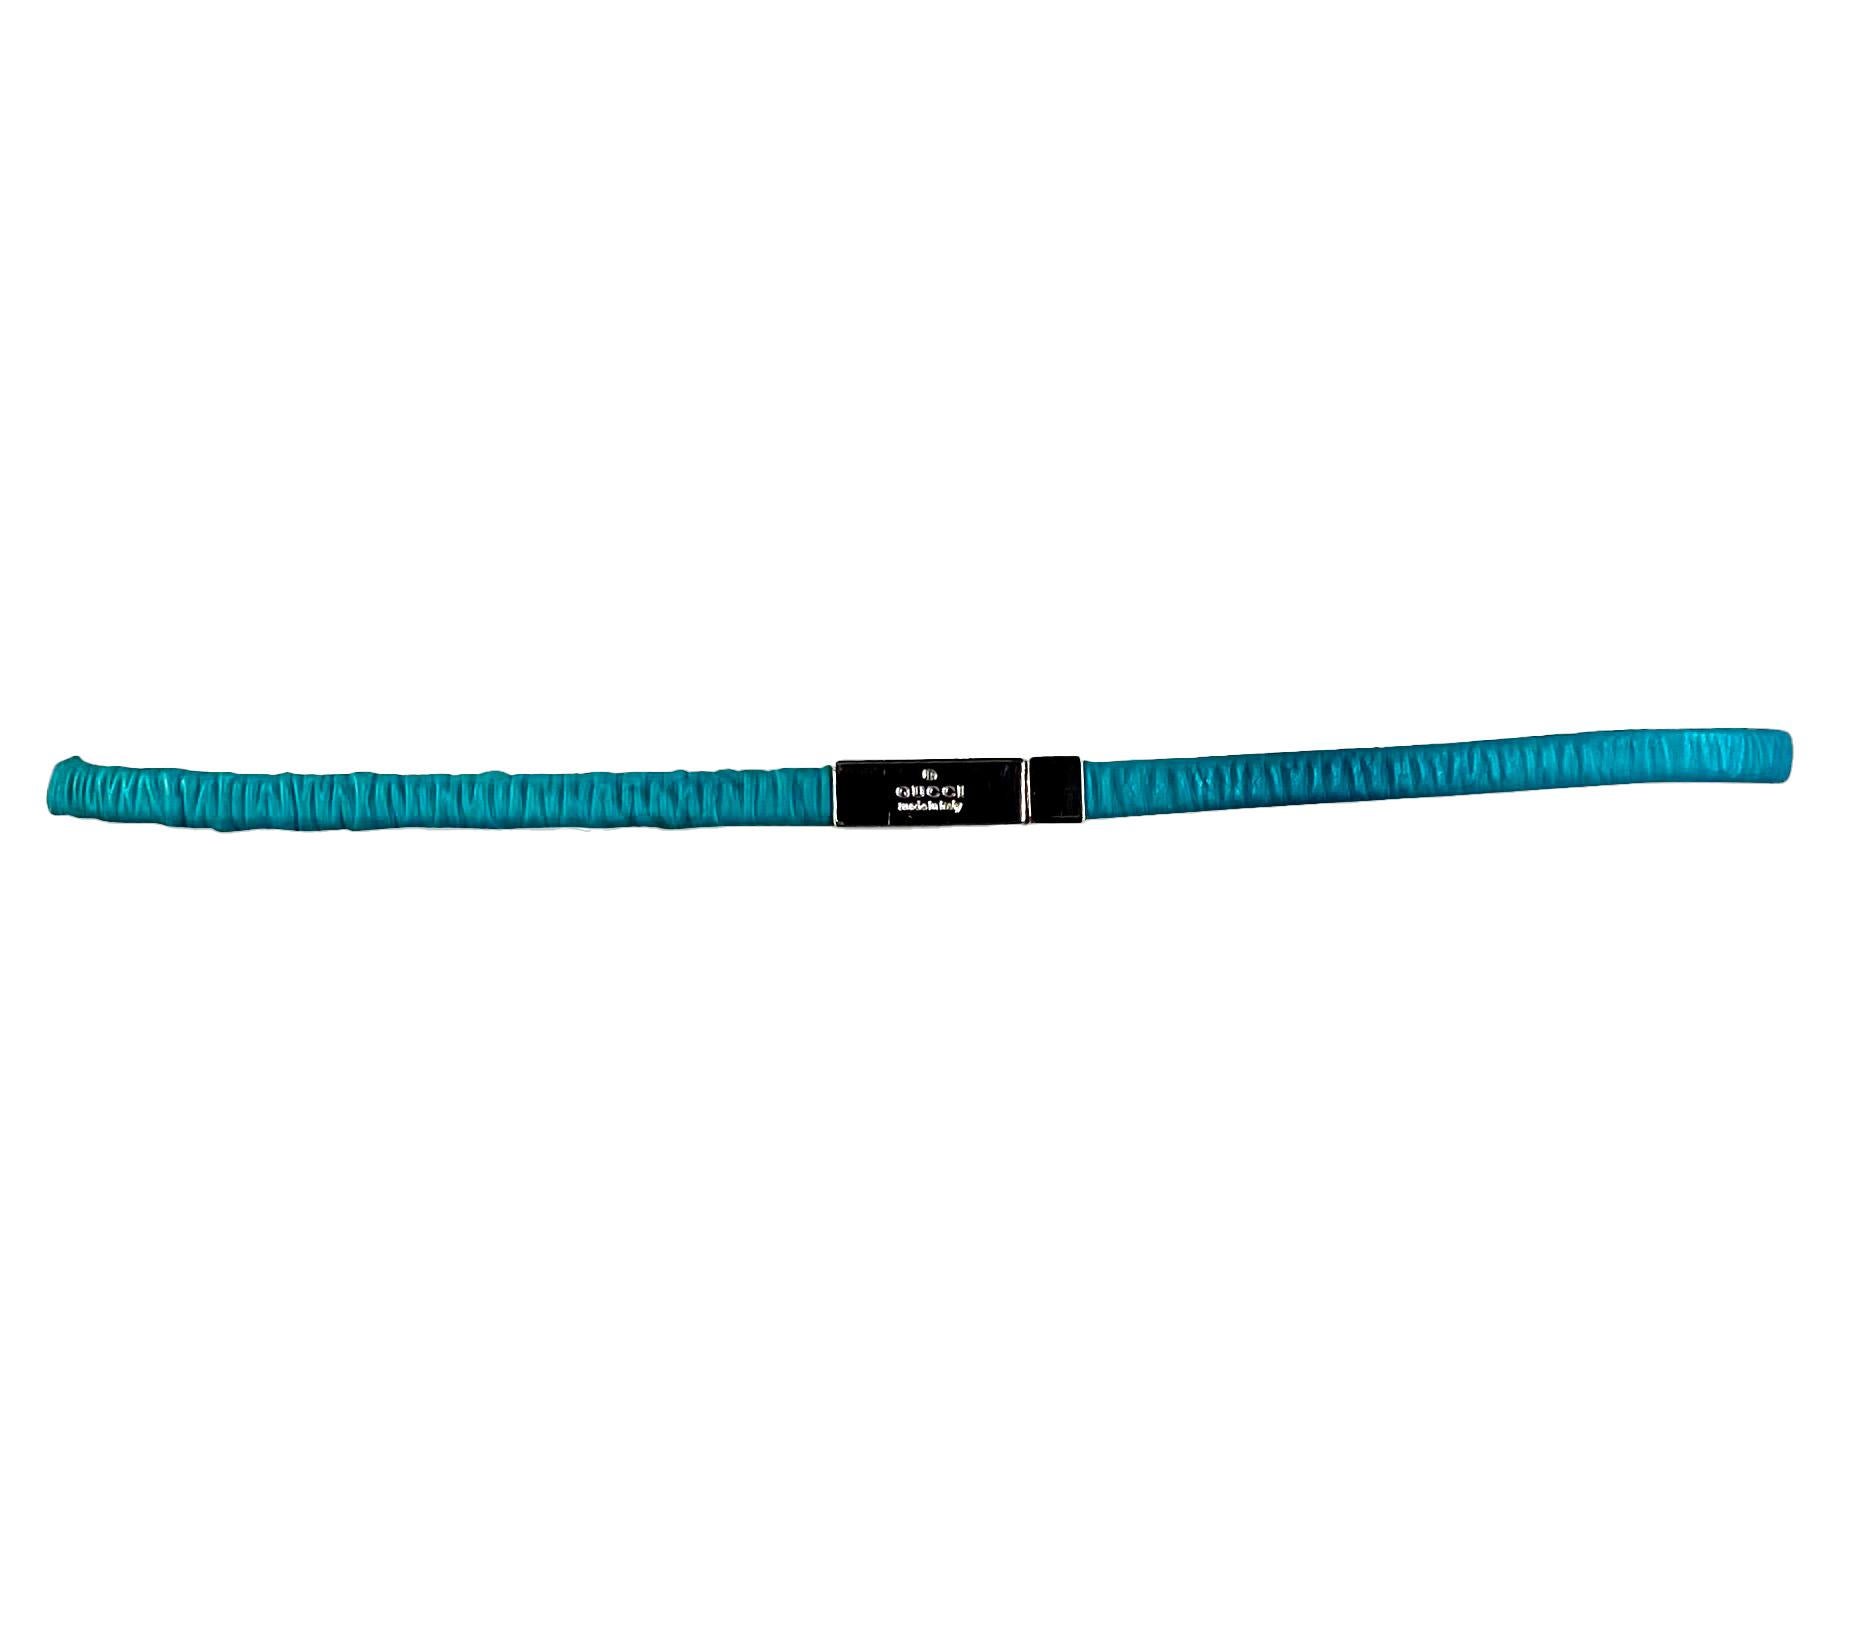 S/S 1999 Gucci by Tom Ford Runway Elasticized Teal Leather Logo Thin Belt In Excellent Condition For Sale In West Hollywood, CA